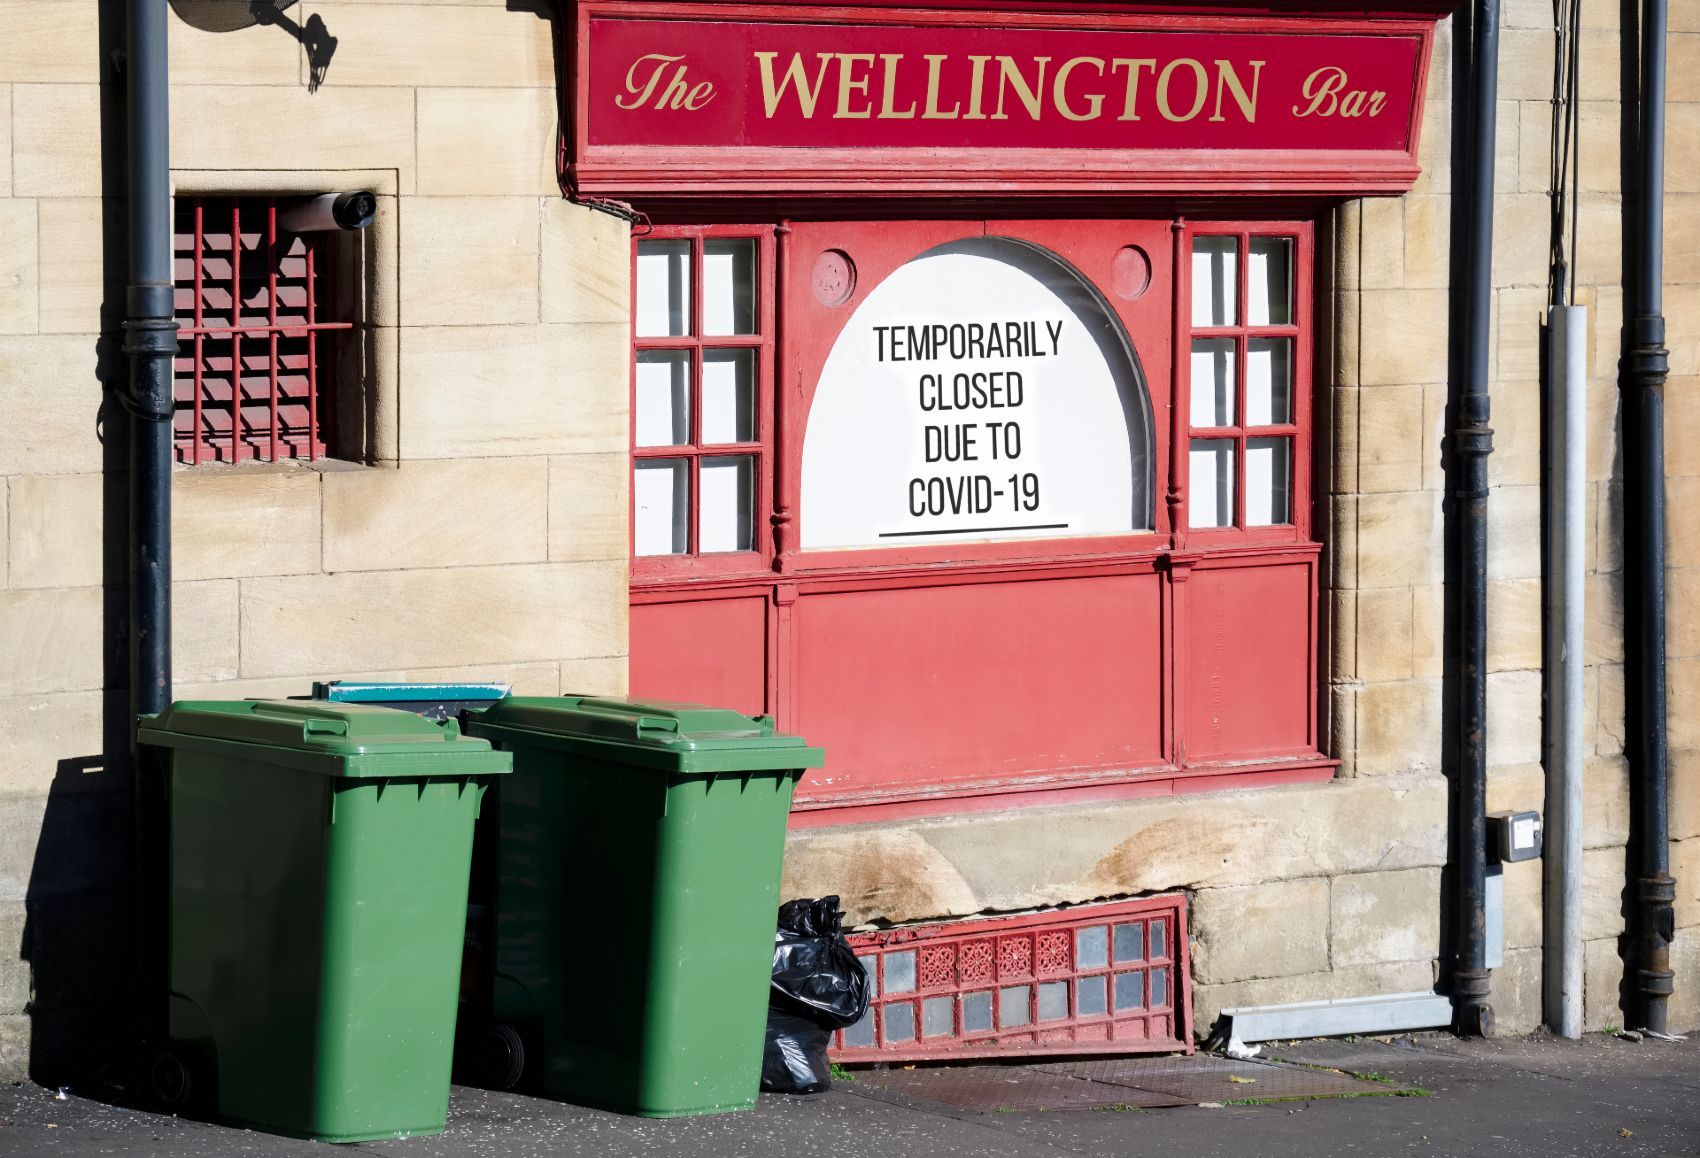 Glasgow, Scotland, UK, October 11th 2020, Central Scotland Pubs and Bars closed by the Scottish Government due to rise in Covid-19 cases — scotland hospitality industry